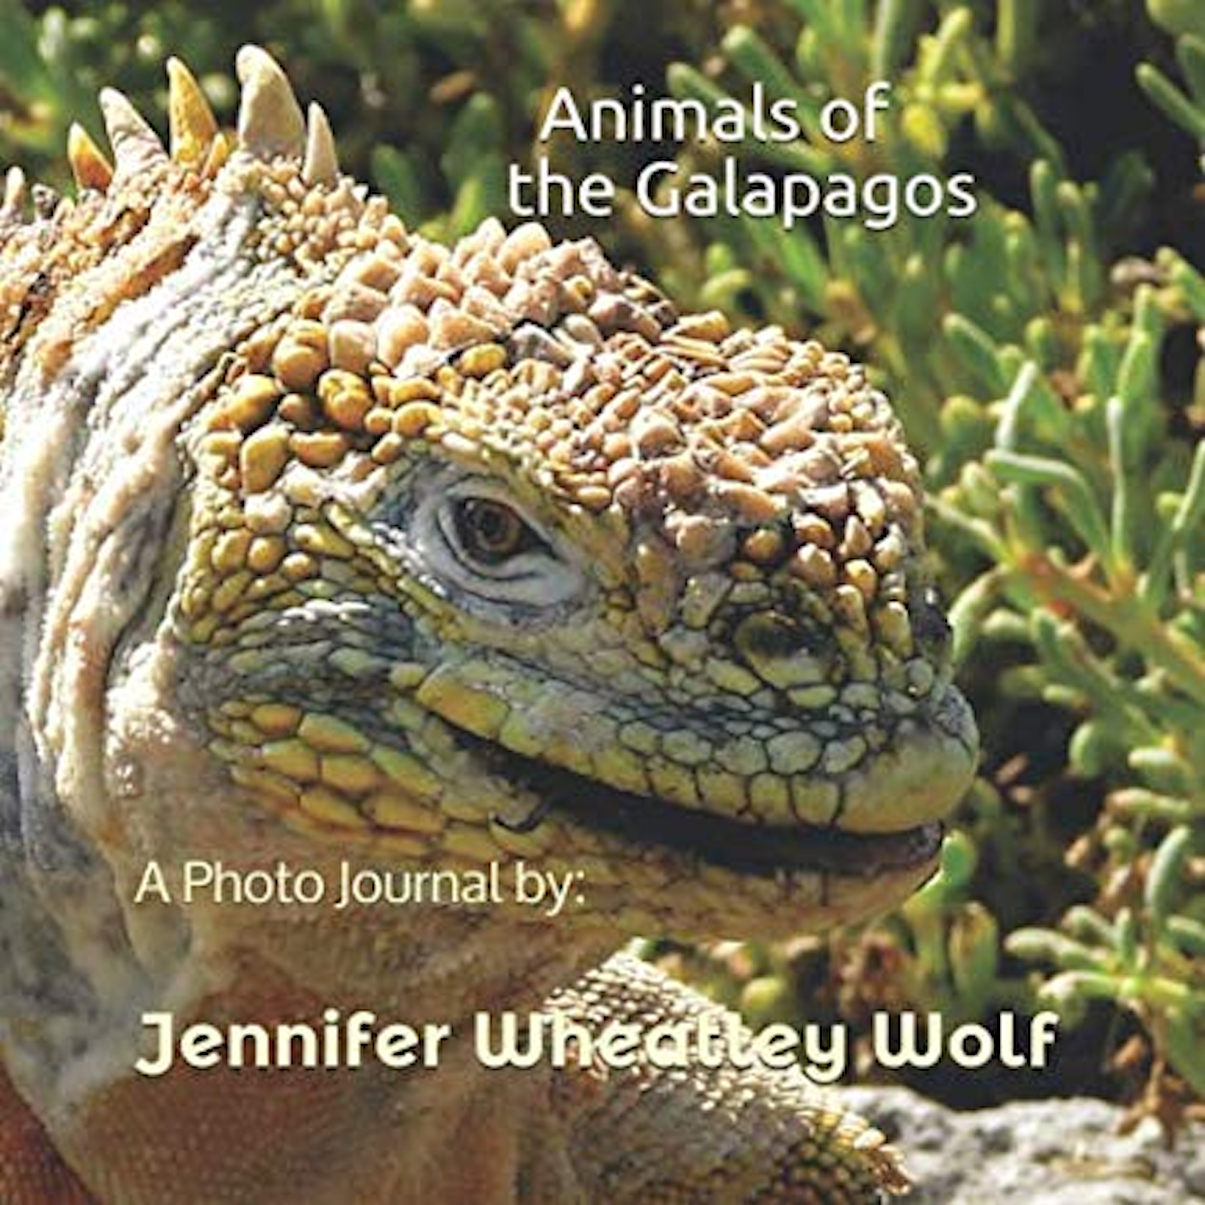 Animals-of-the-Galapagos-A-Photo-Journal-by-Jennifer-A-Wheatley-Wolf